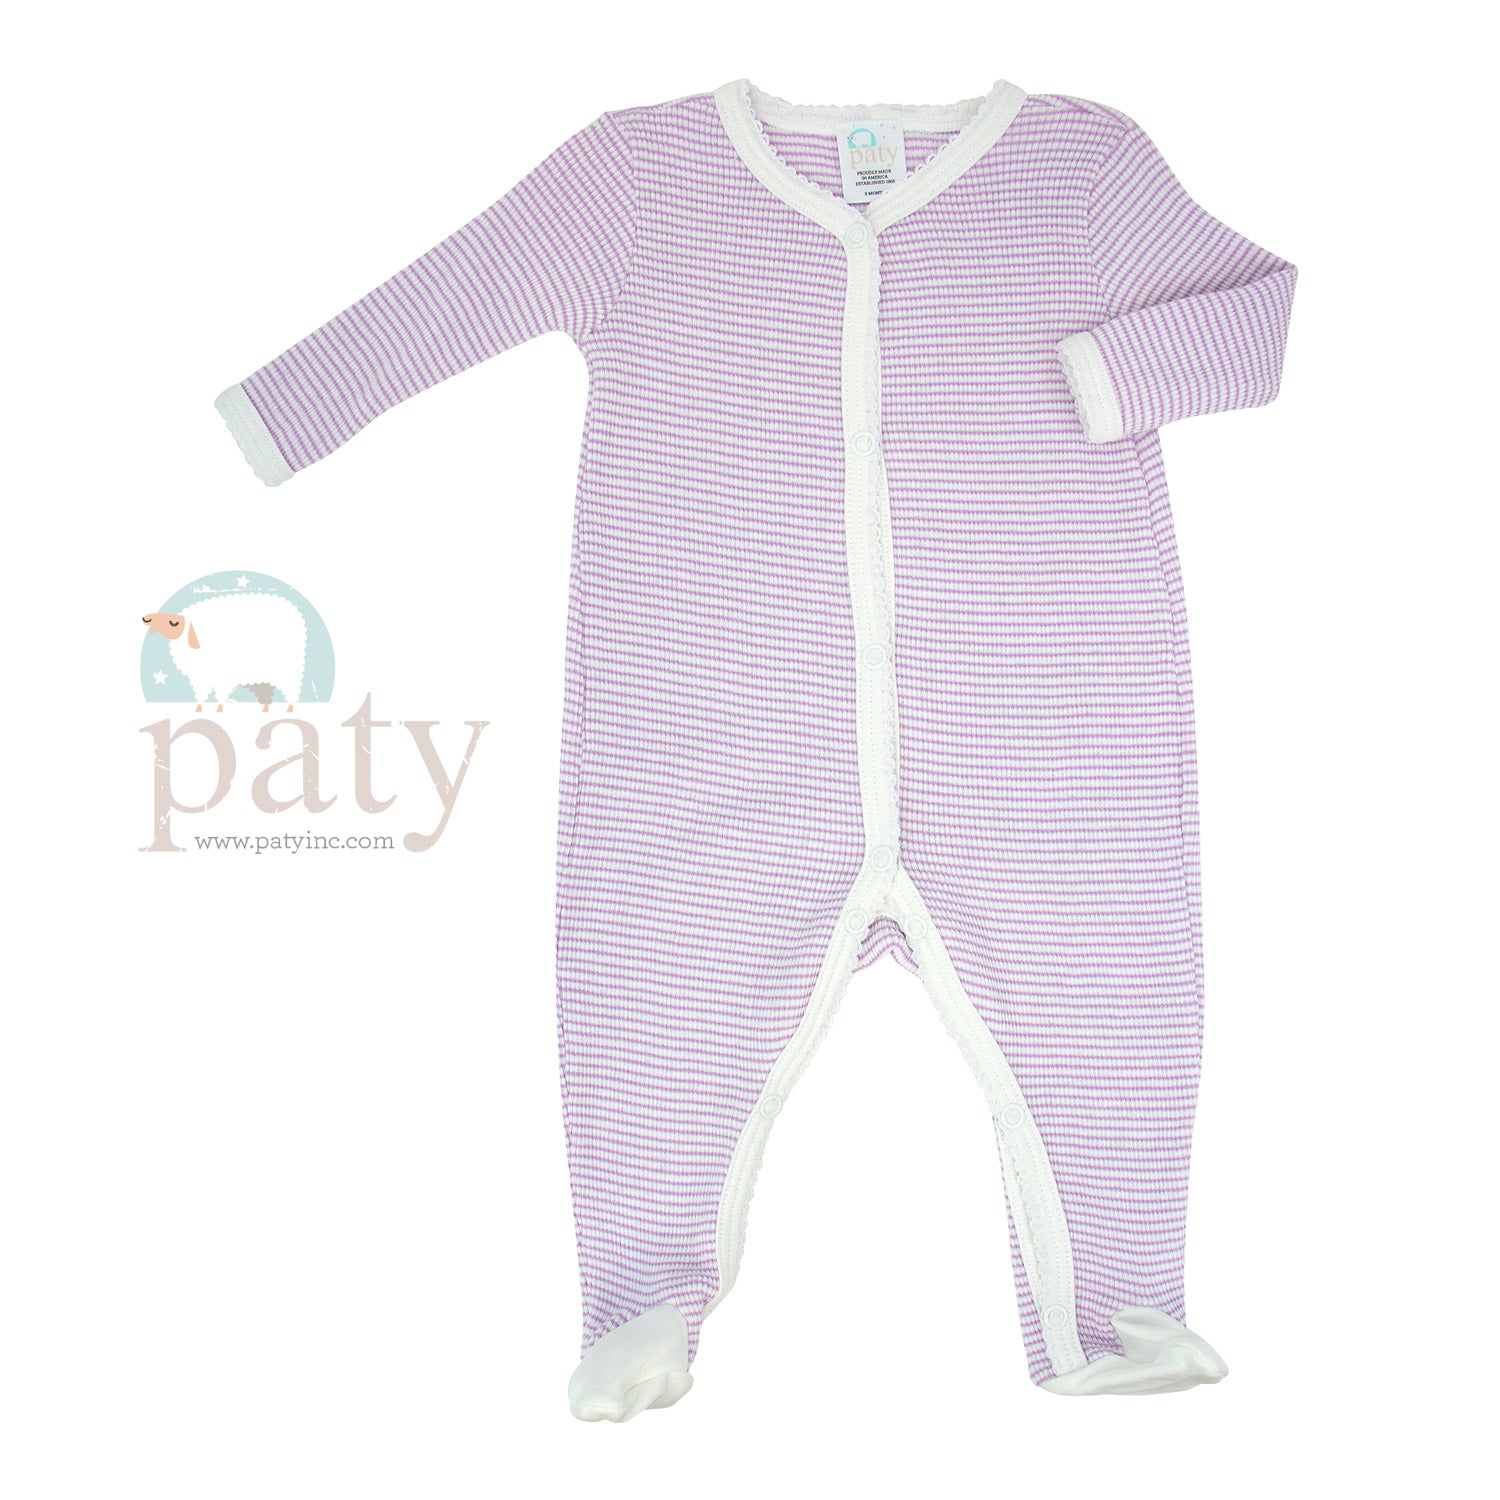 Lavender with White Trim Paty Rib Knit Footie